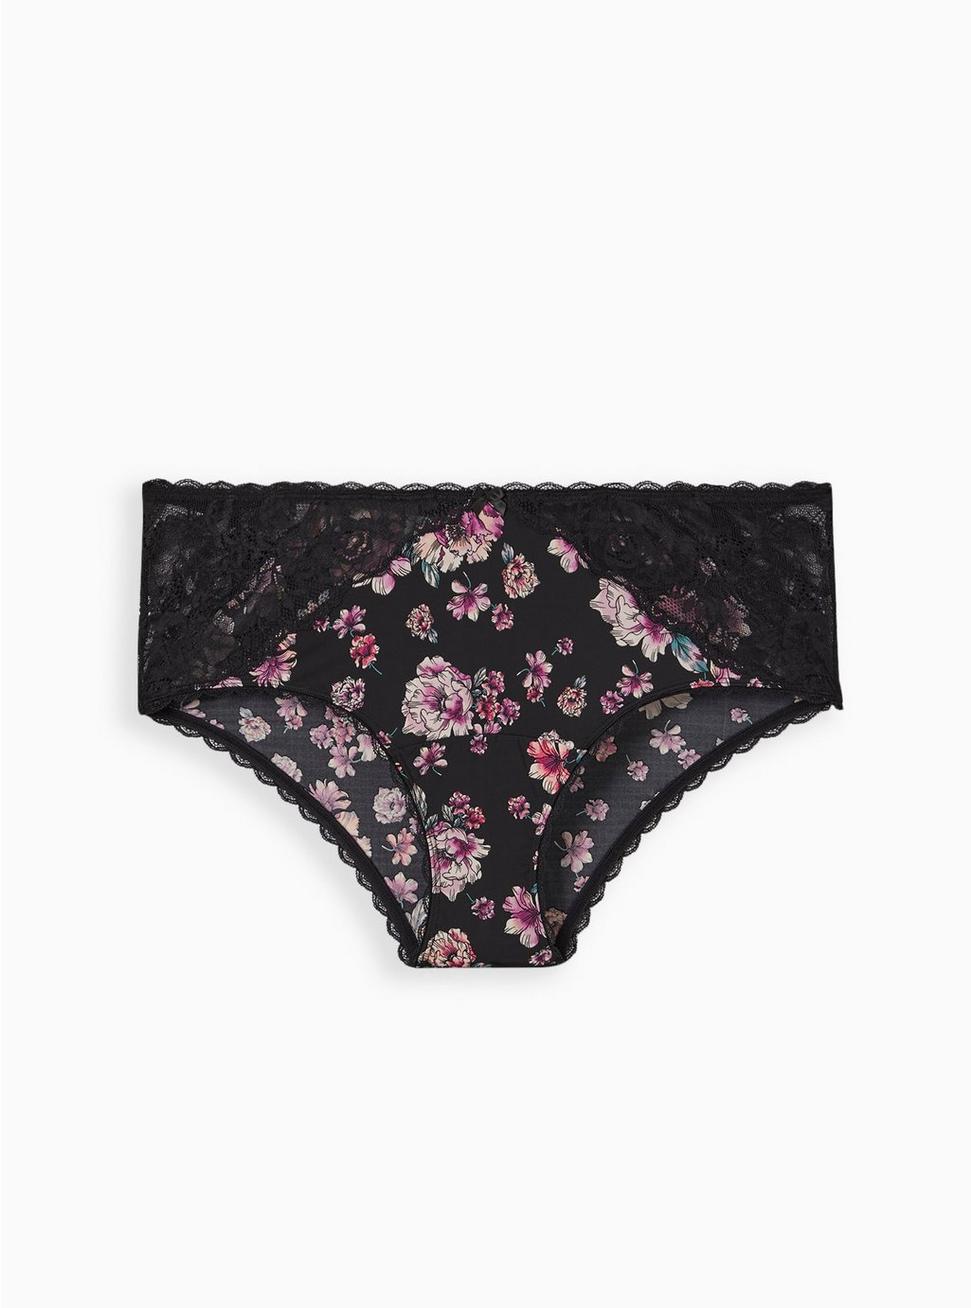 Microfiber And Lace Mid-Rise Hipster Panty, WATERCOLOR EXPLOSION FLORAL RICH BLACK, hi-res